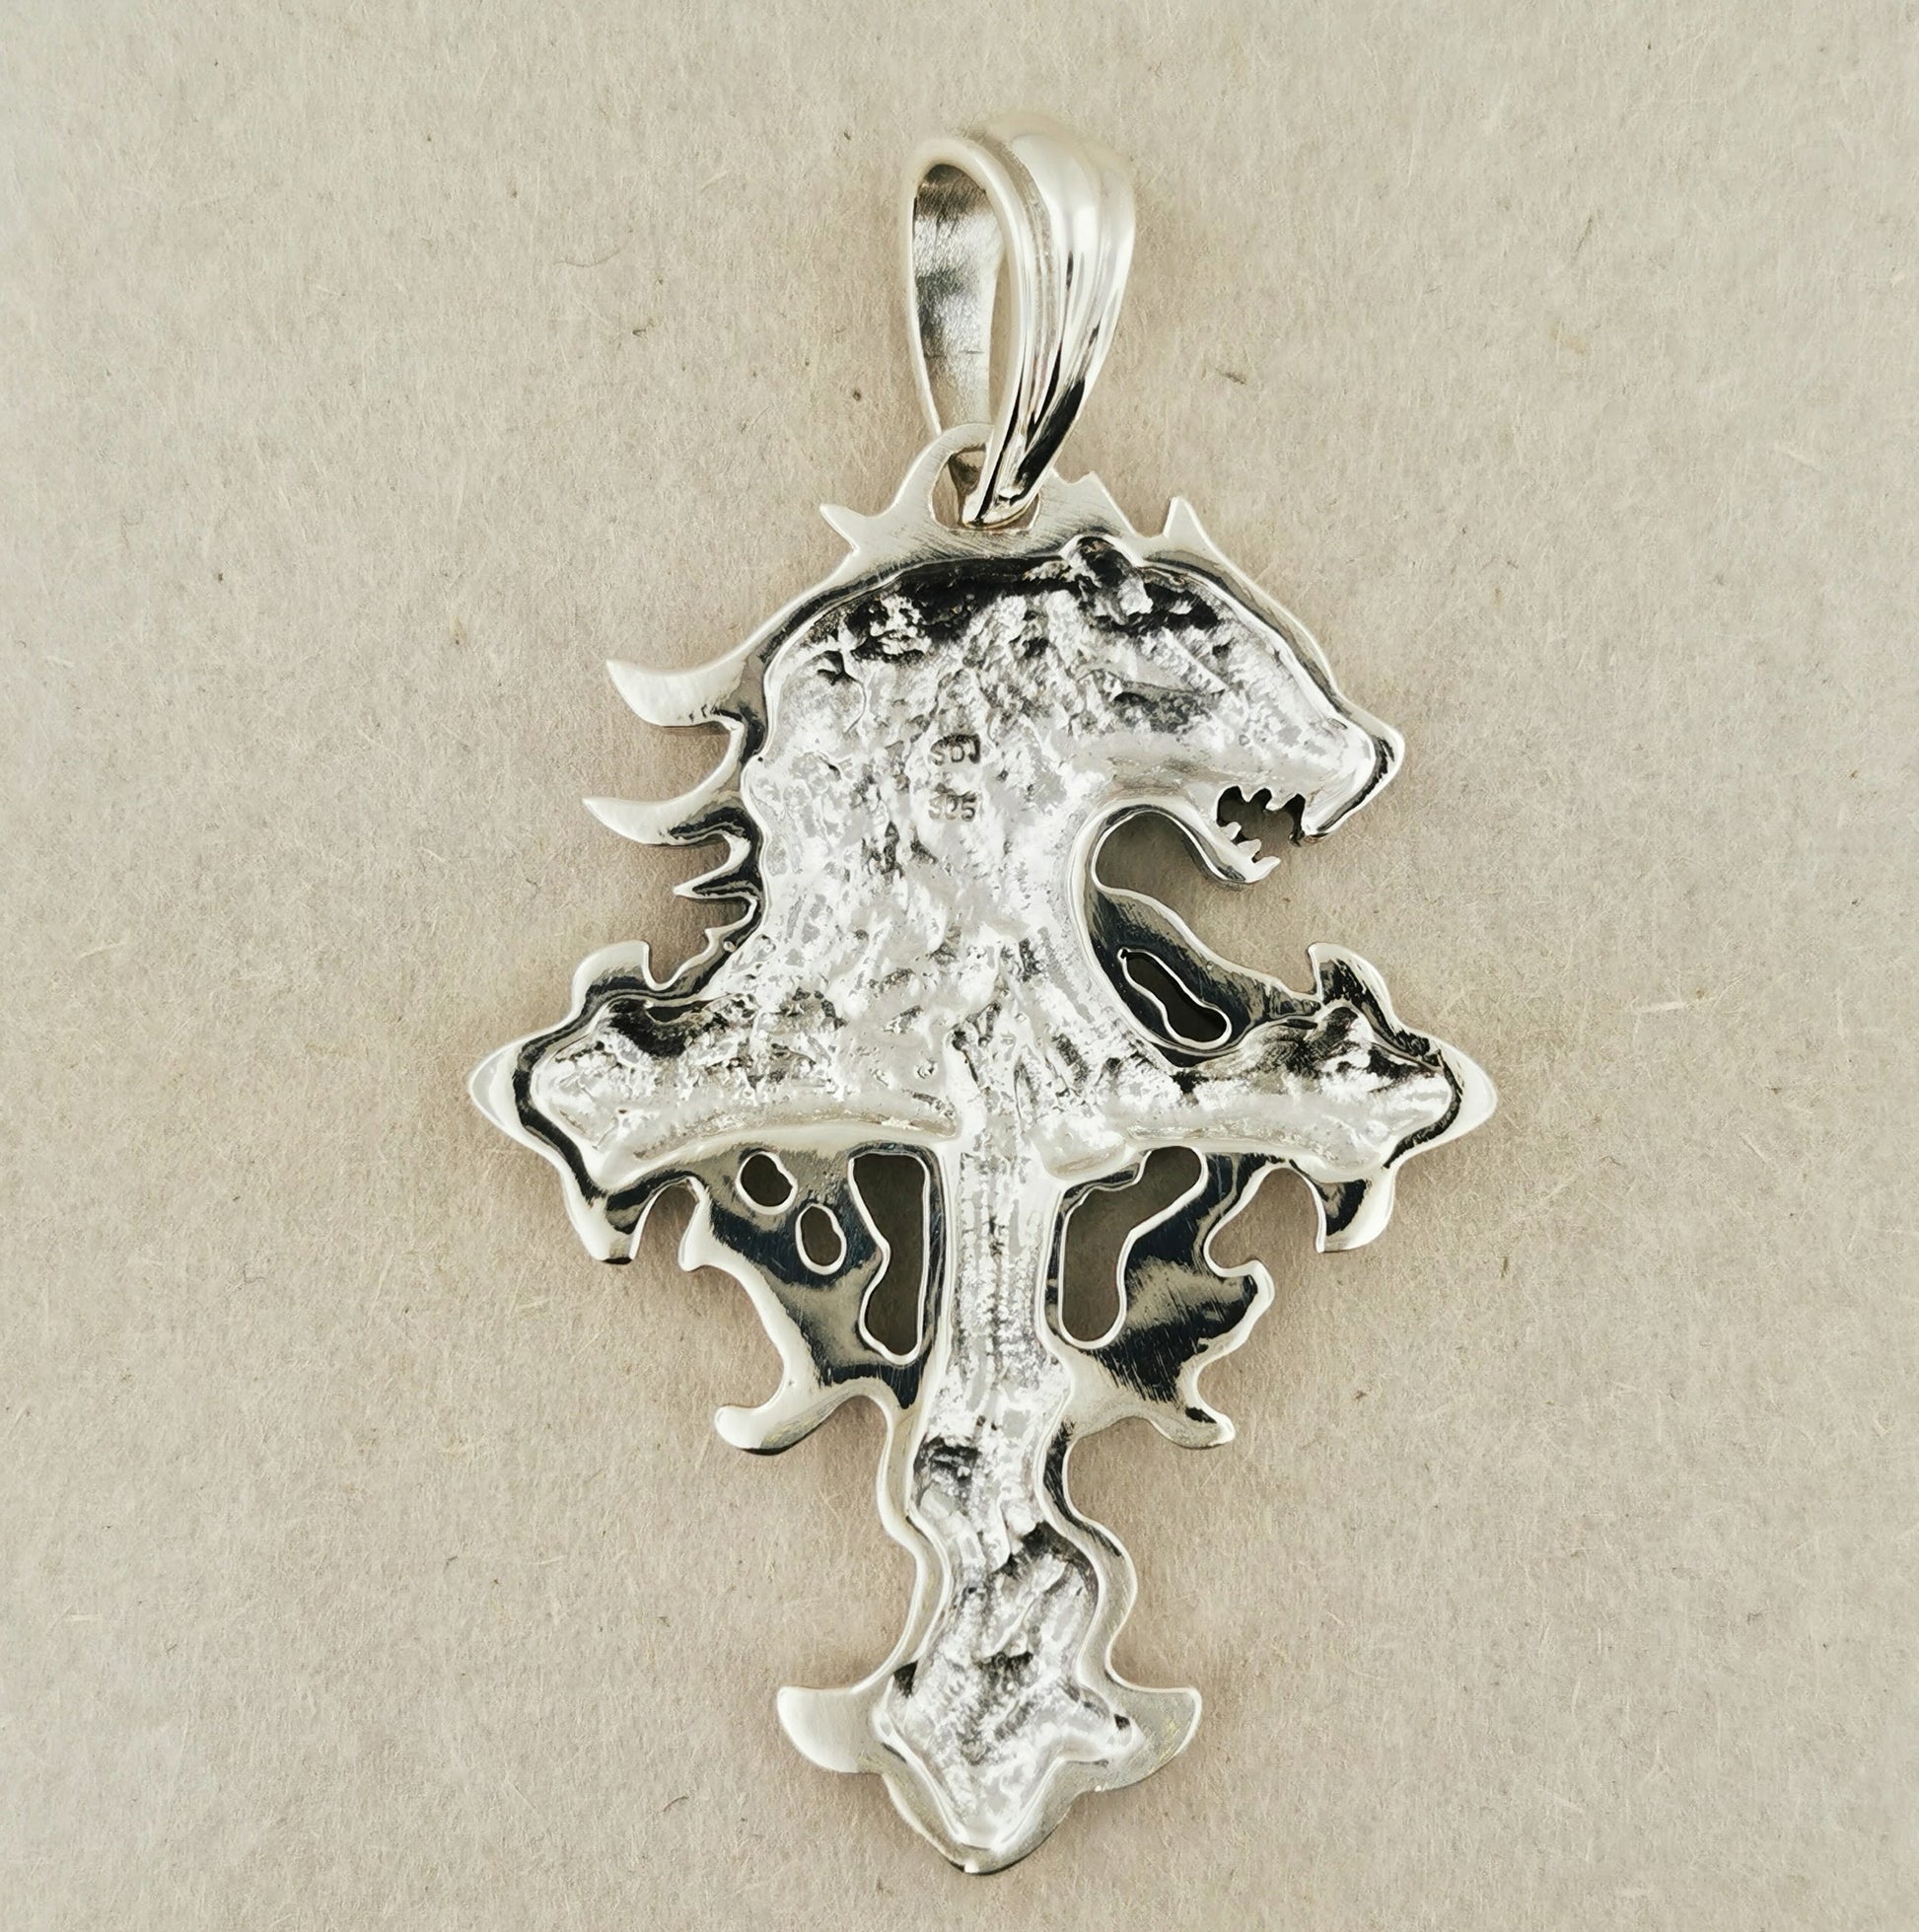 Final Fantasy 8 Squall Griever Pendant in Sterling Silver, FFVIII Cosplay Pendant, FFVIII Sleeping Lion Pendant, squall leonhart, silver final fantasy pendant, final fantasy 8, video game pendant, griever lion pendant, silver final fantasy jewelry